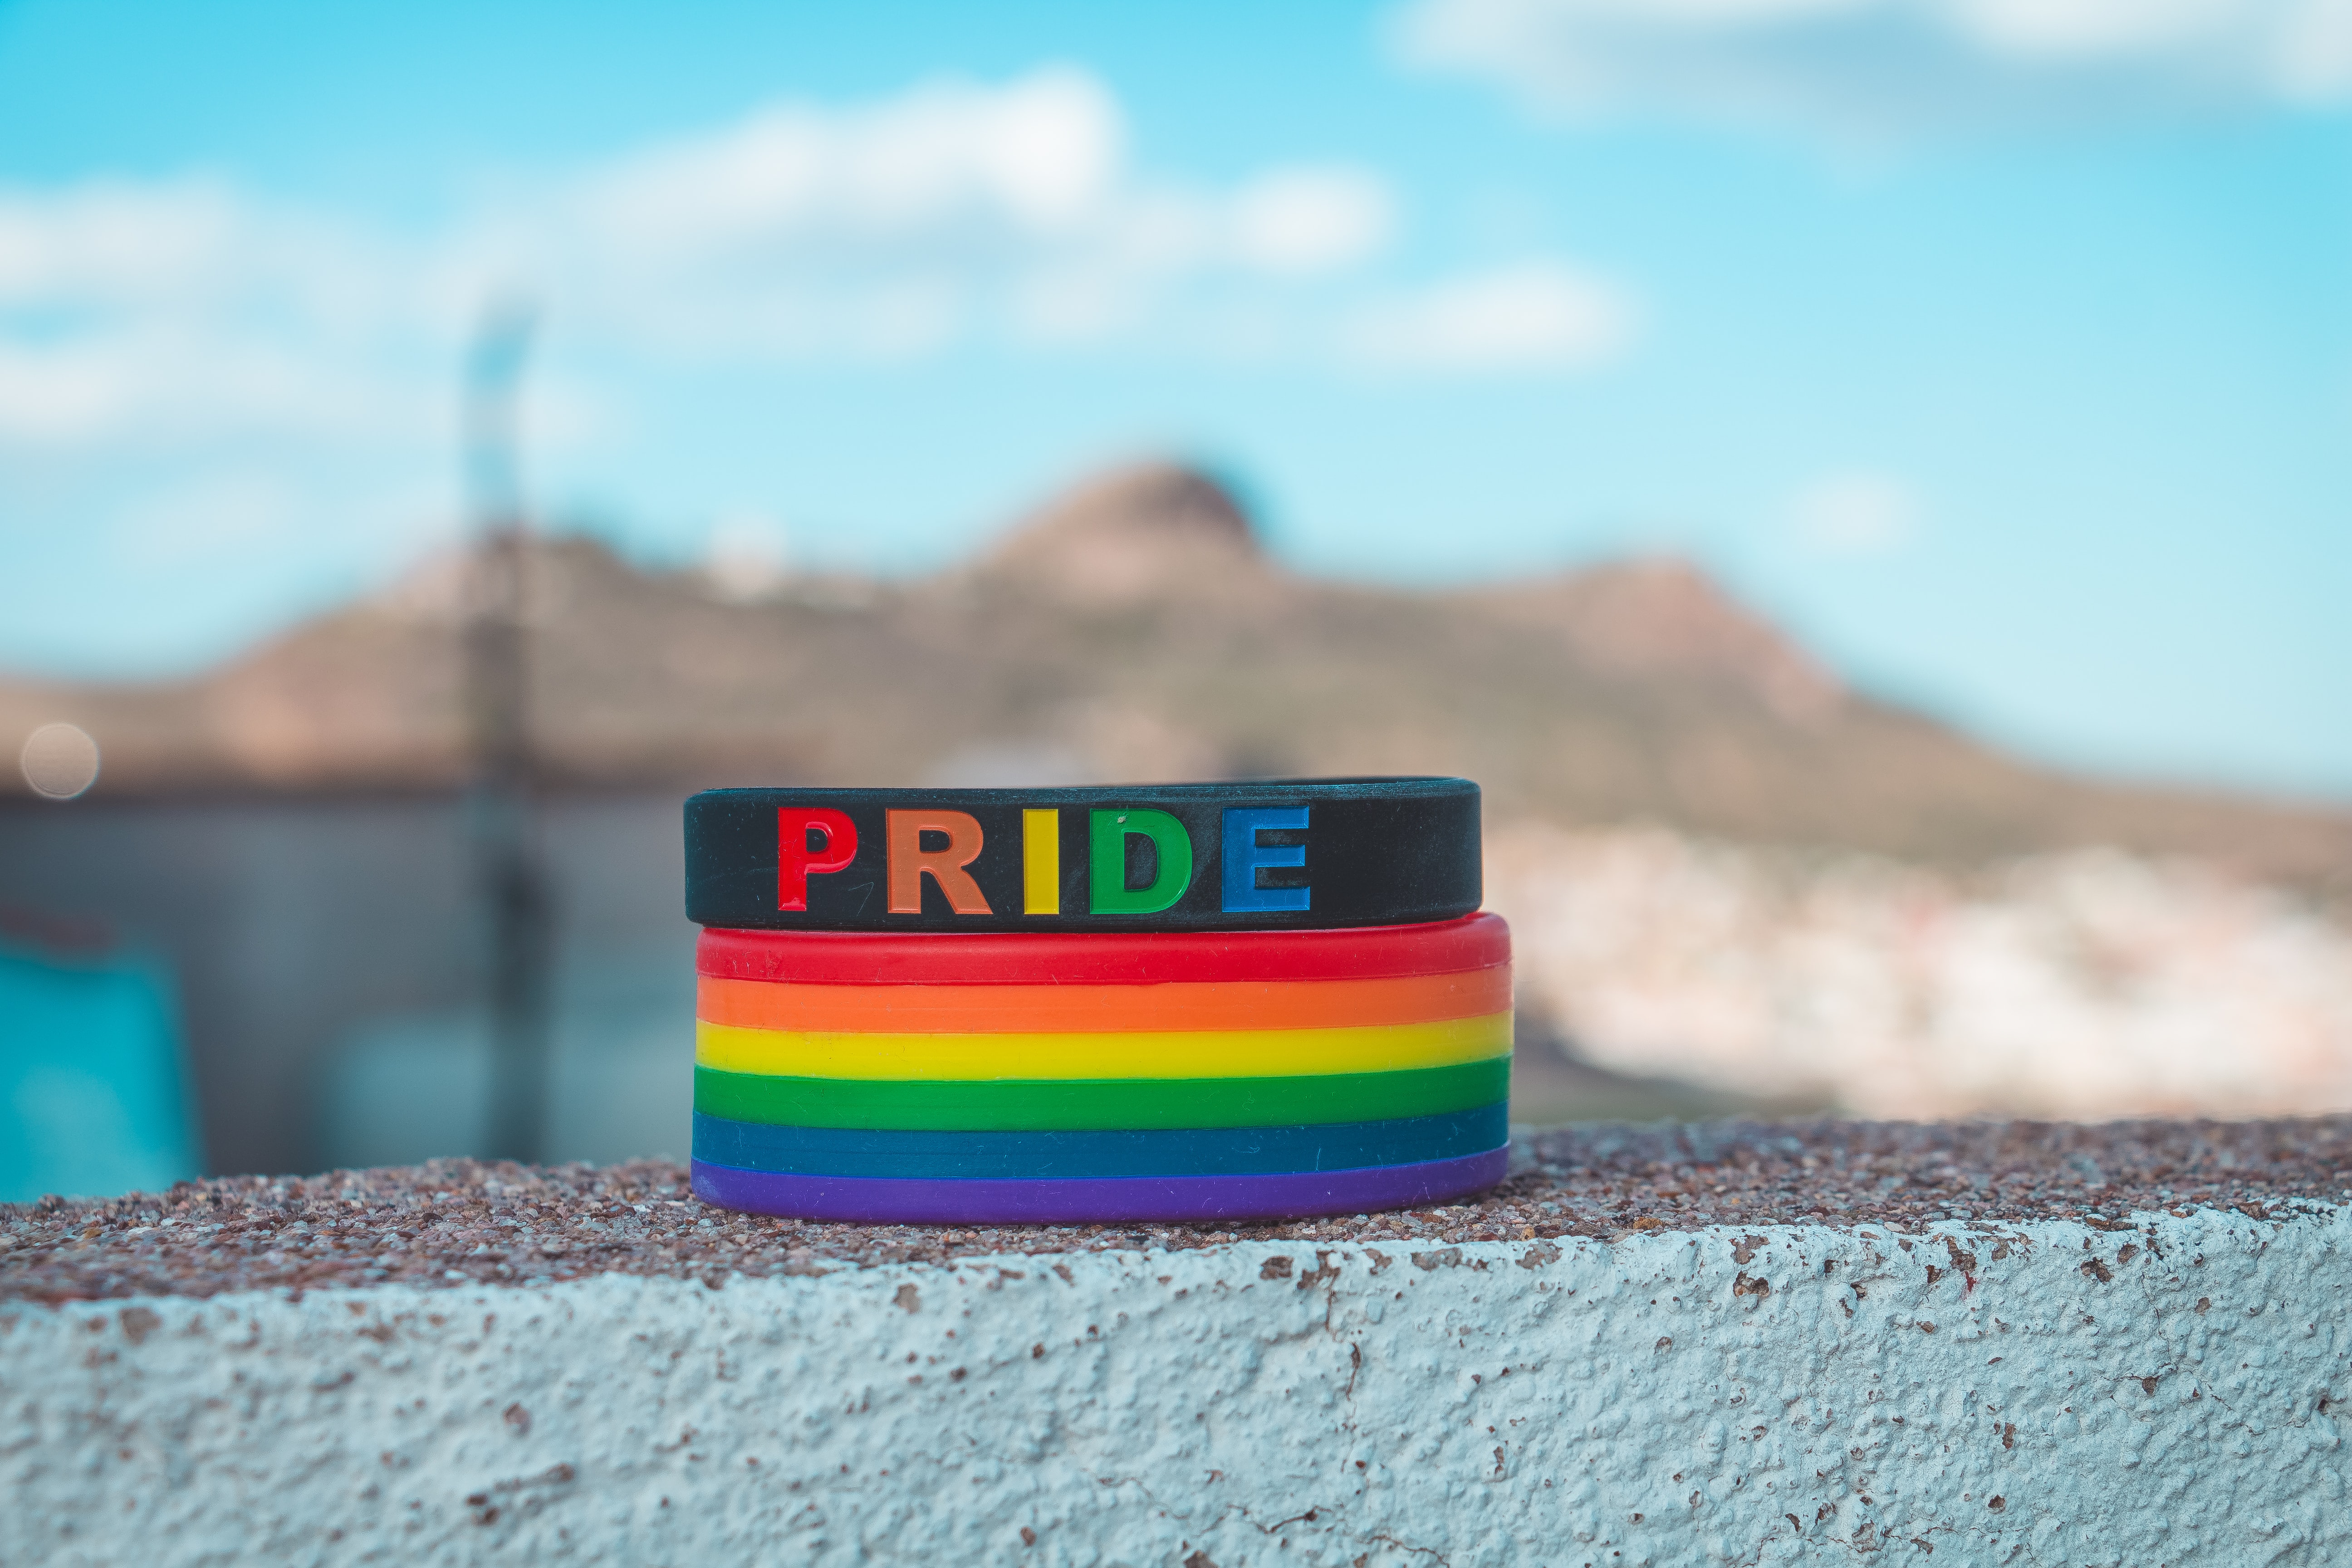 Proud to support “PRIDE”